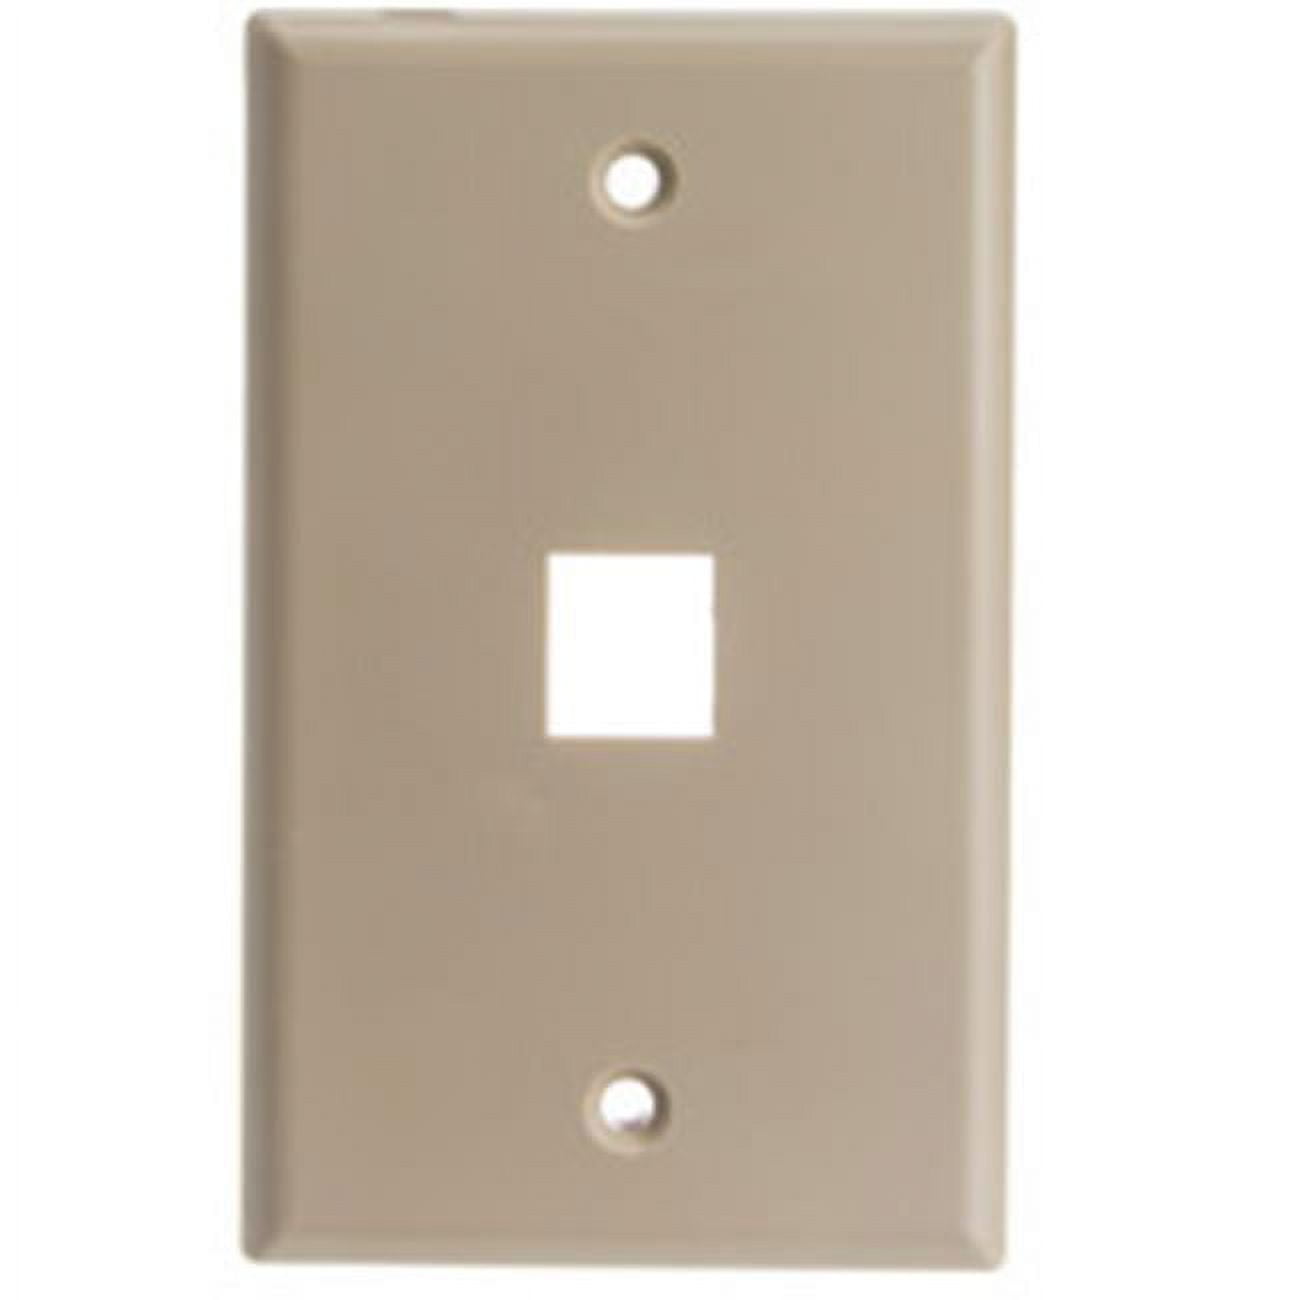 Picture of Cable Wholesale 301-6K 6 Port Keystone Wall Plate, Single Gang - Beige